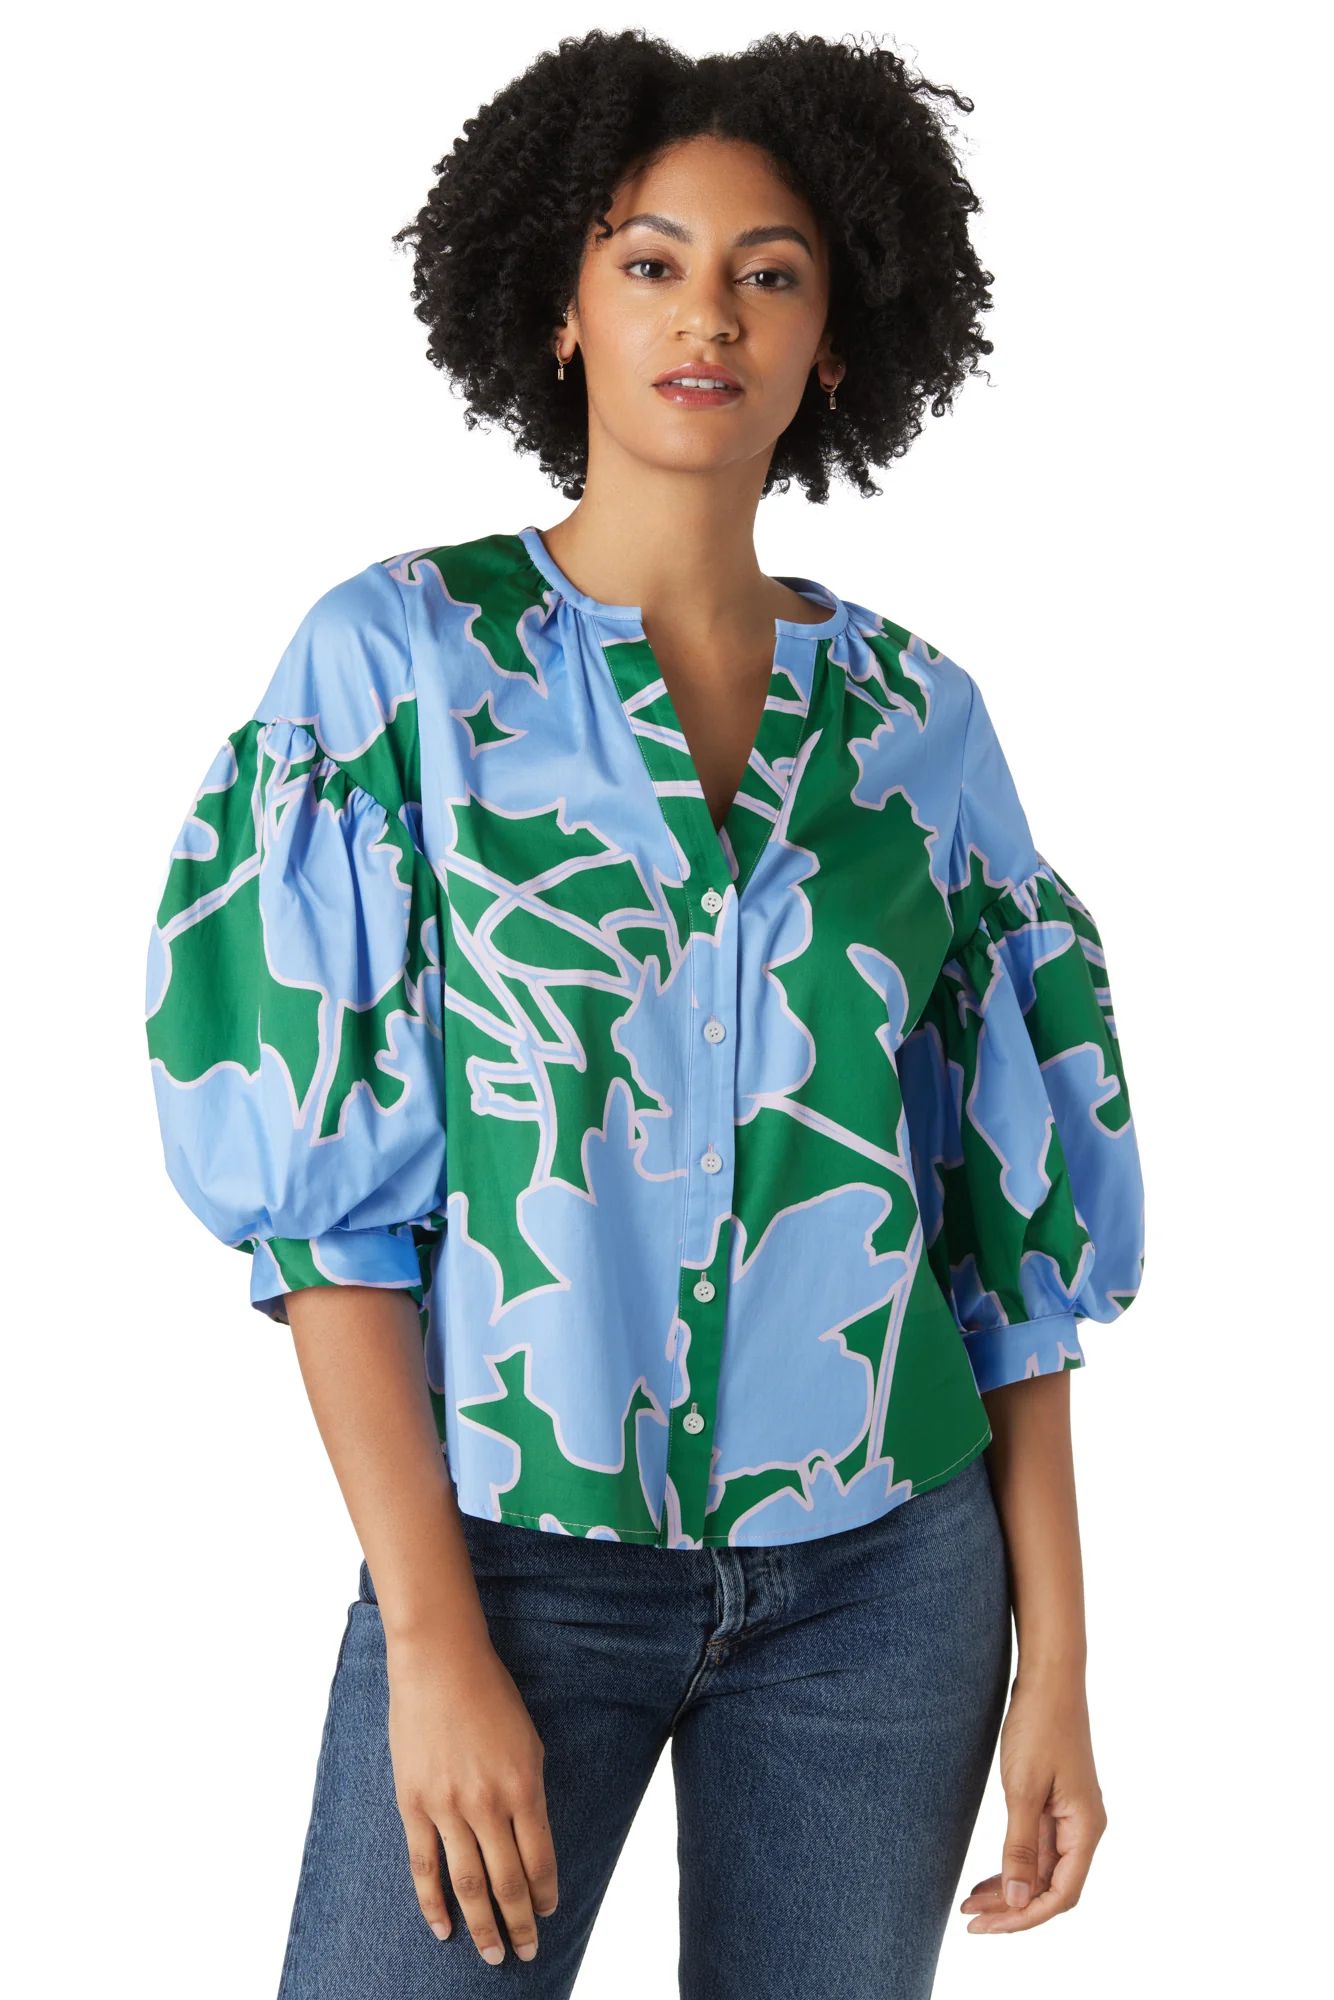 Ashby Top in Floral Figure | CROSBY by Mollie Burch | CROSBY by Mollie Burch